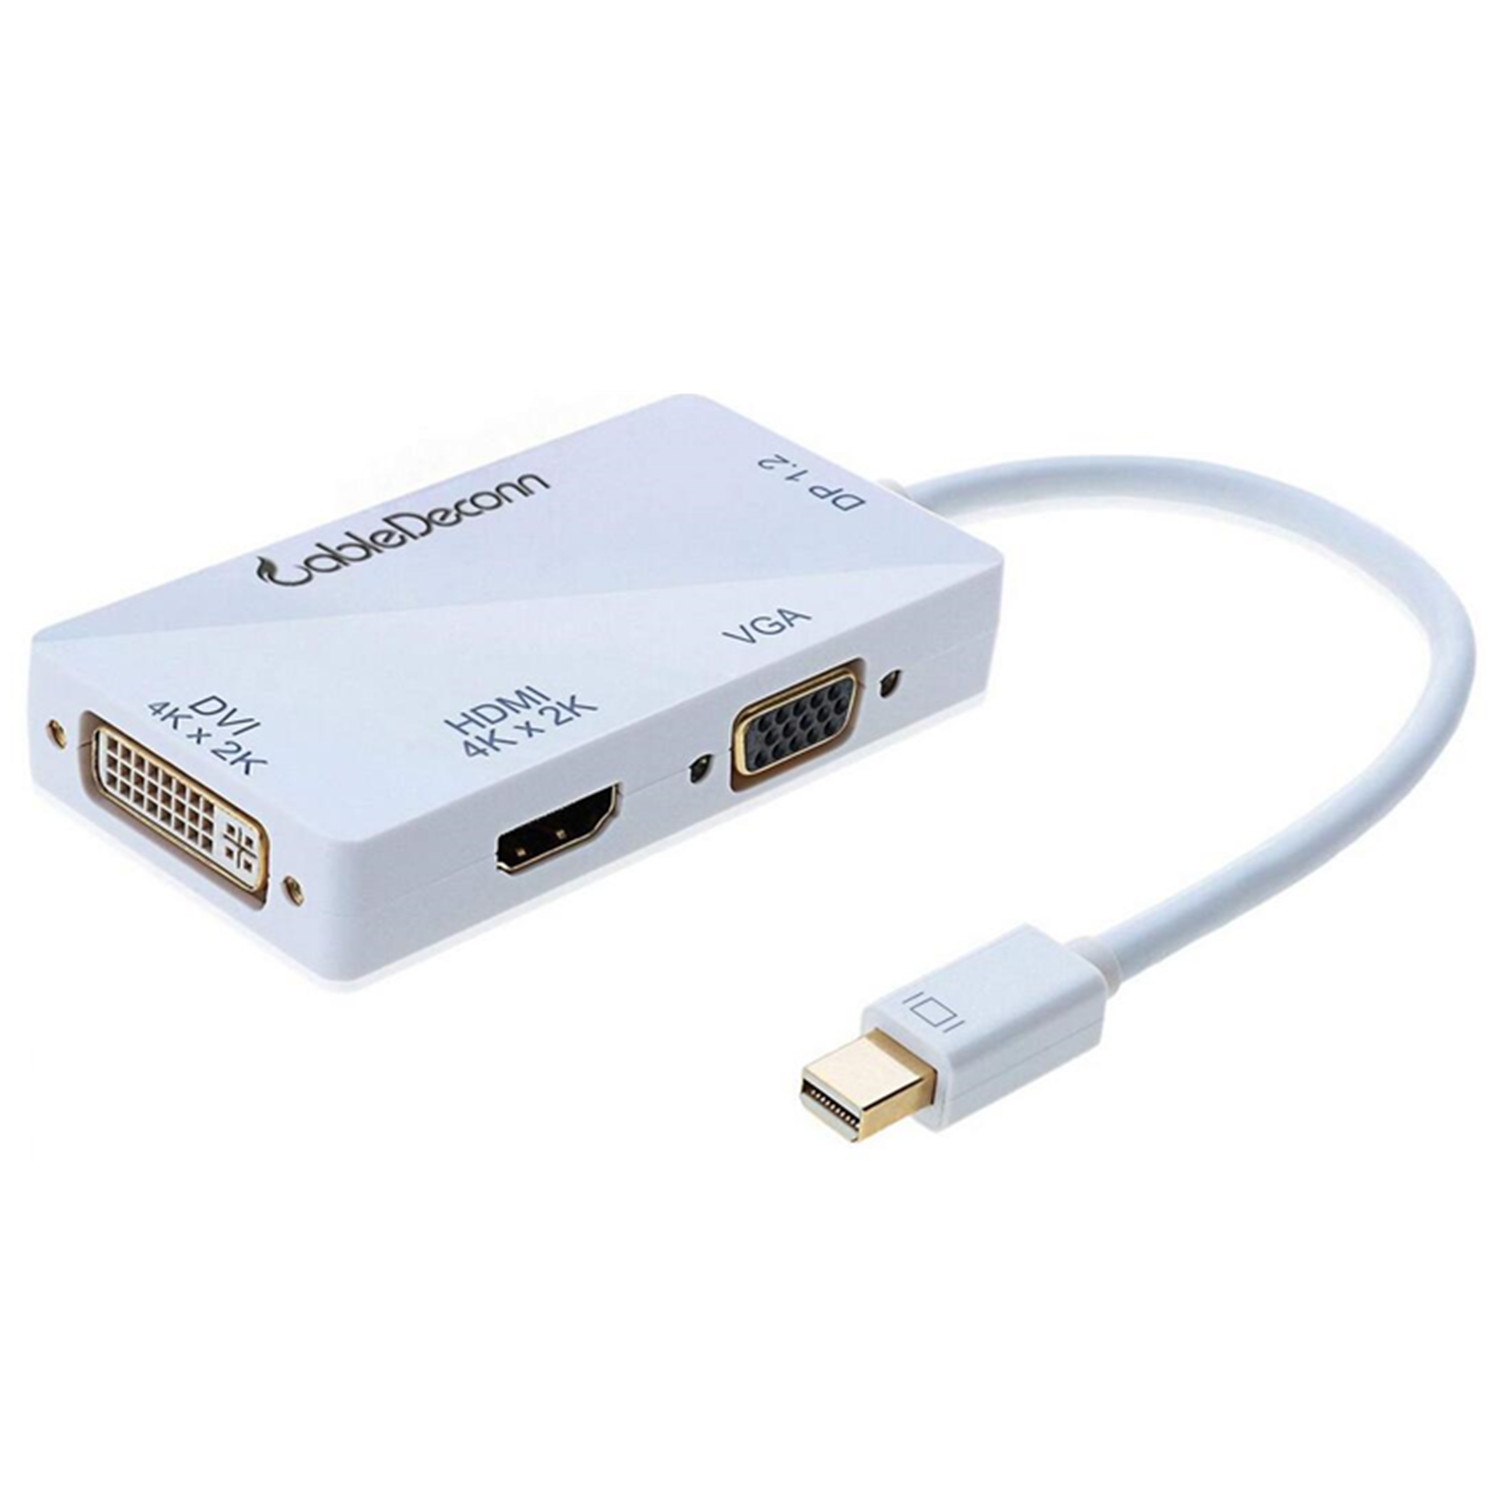 CABLEDECONN Multi-Function Displayport Dp to HDMI/DVI/VGA Male to Female  3-in-1 Adapter Converter Cable